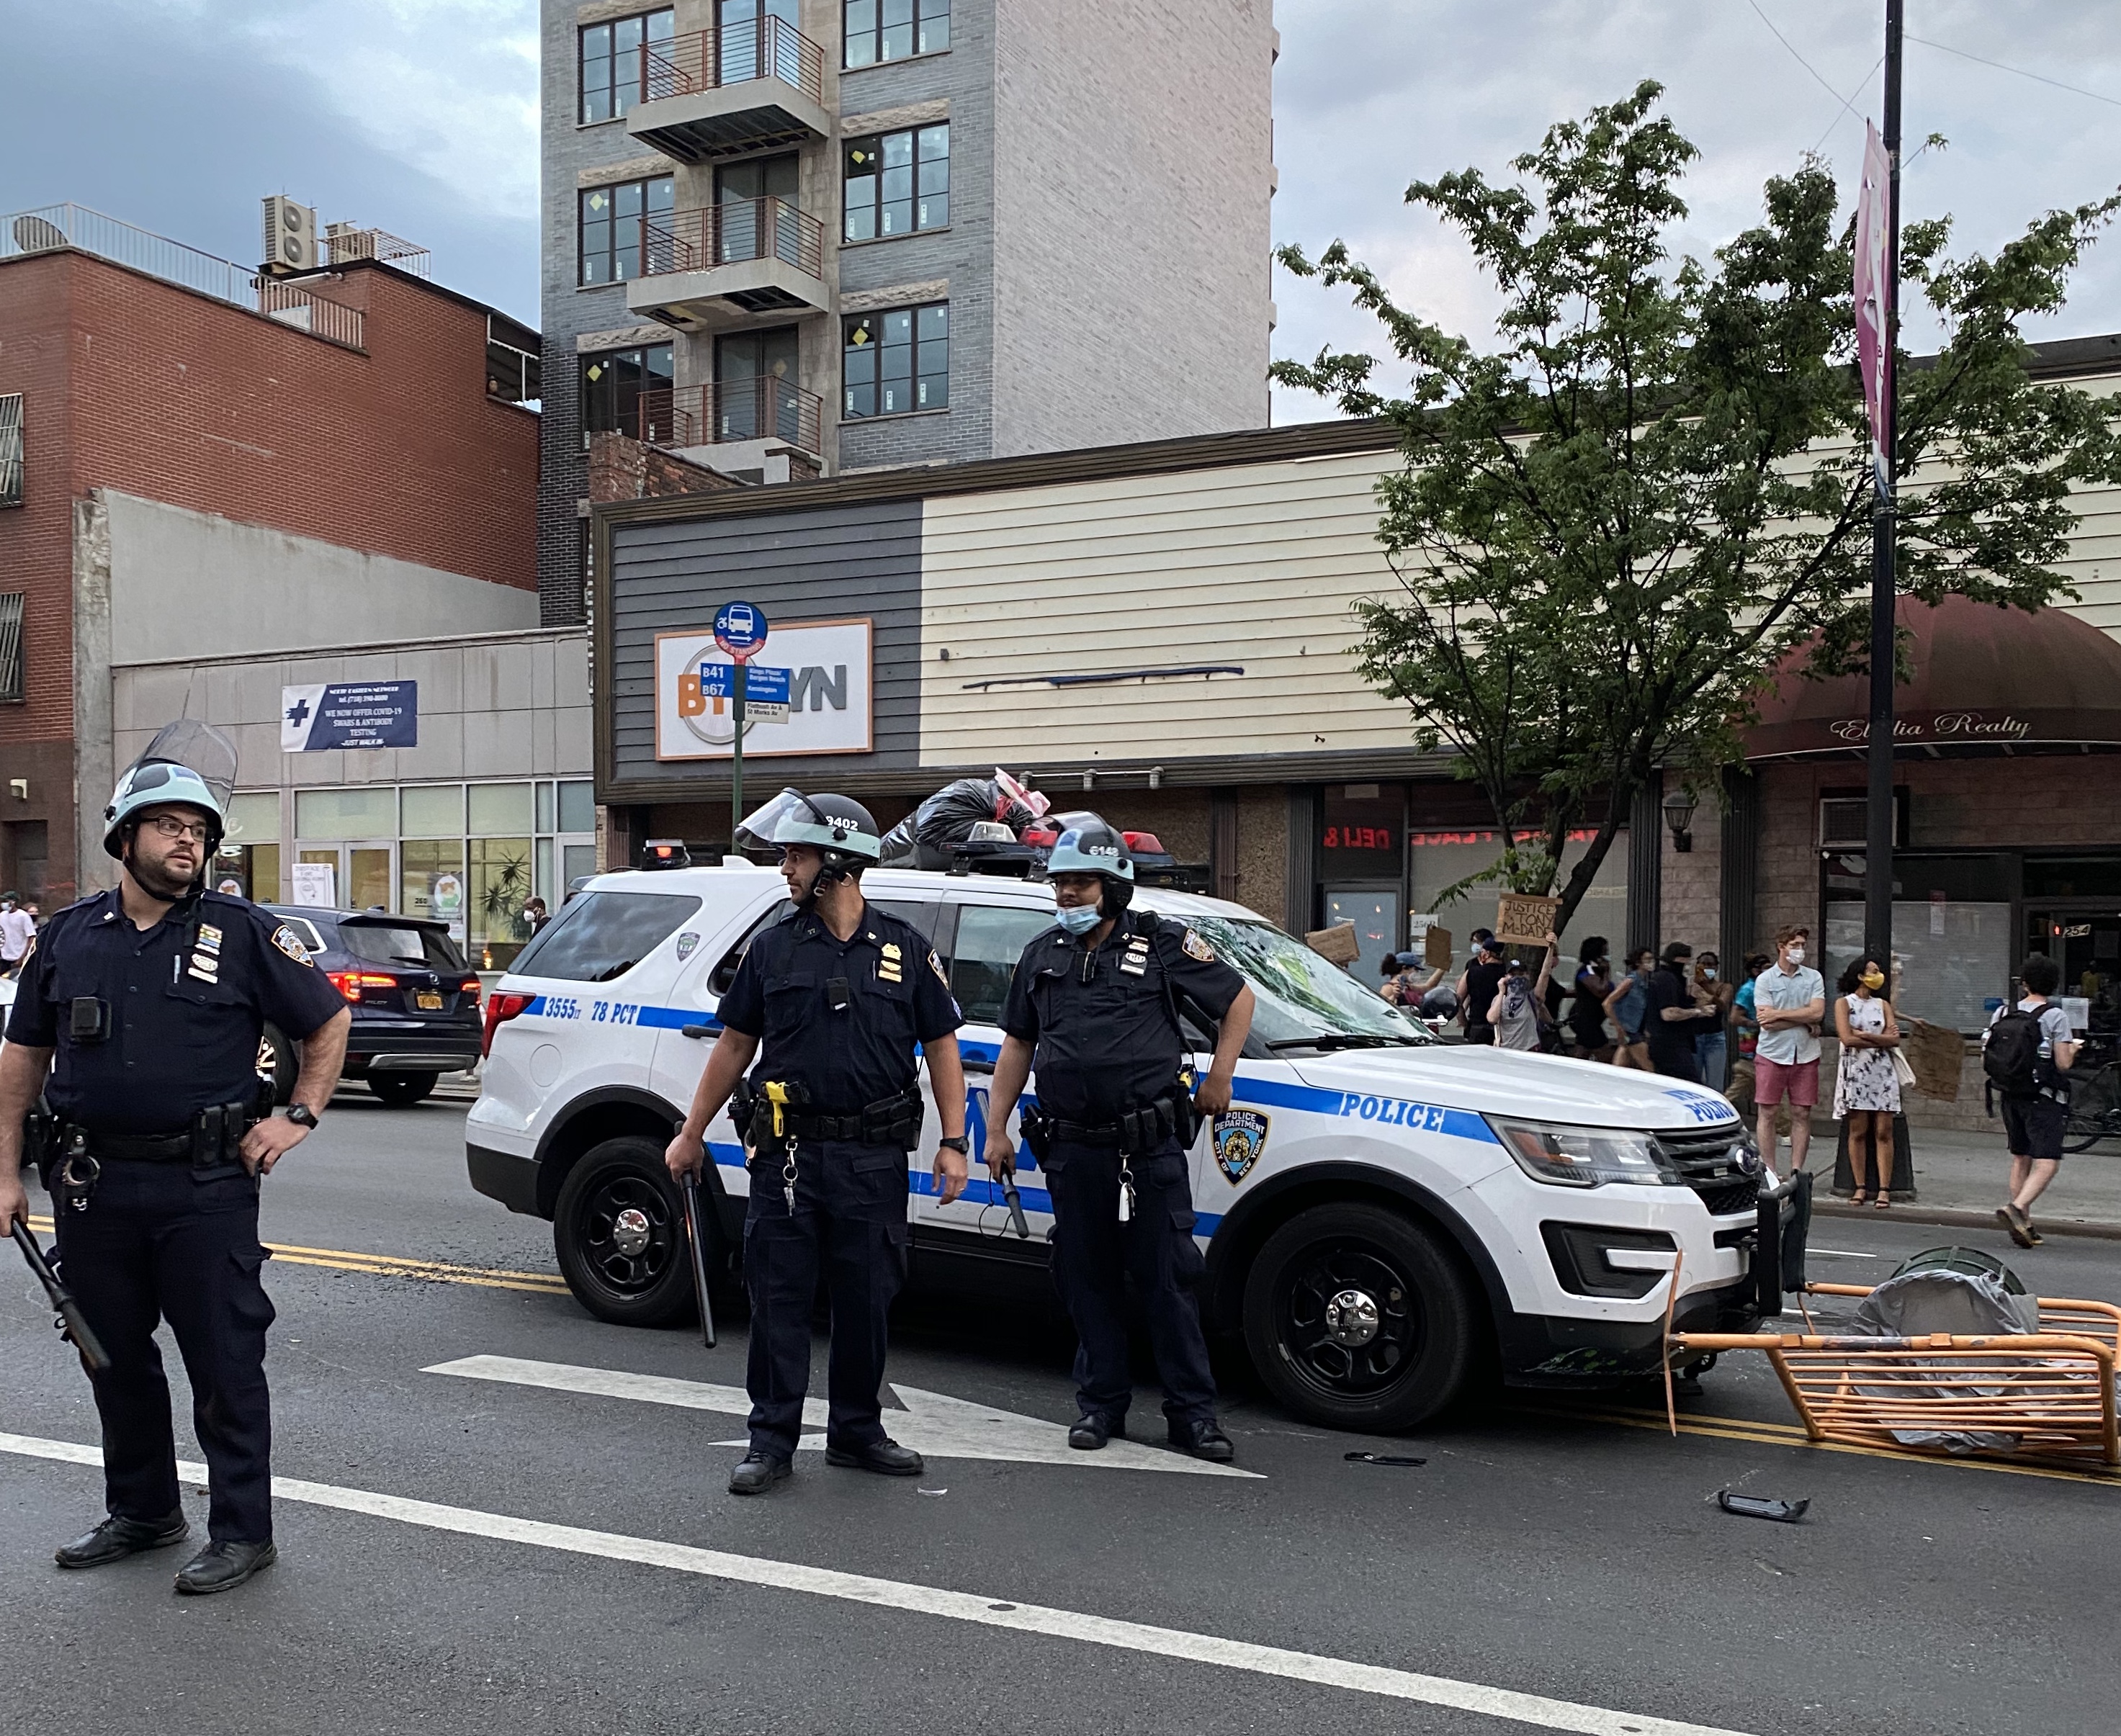 3 New York Police officers stand near squad car in middle of street.